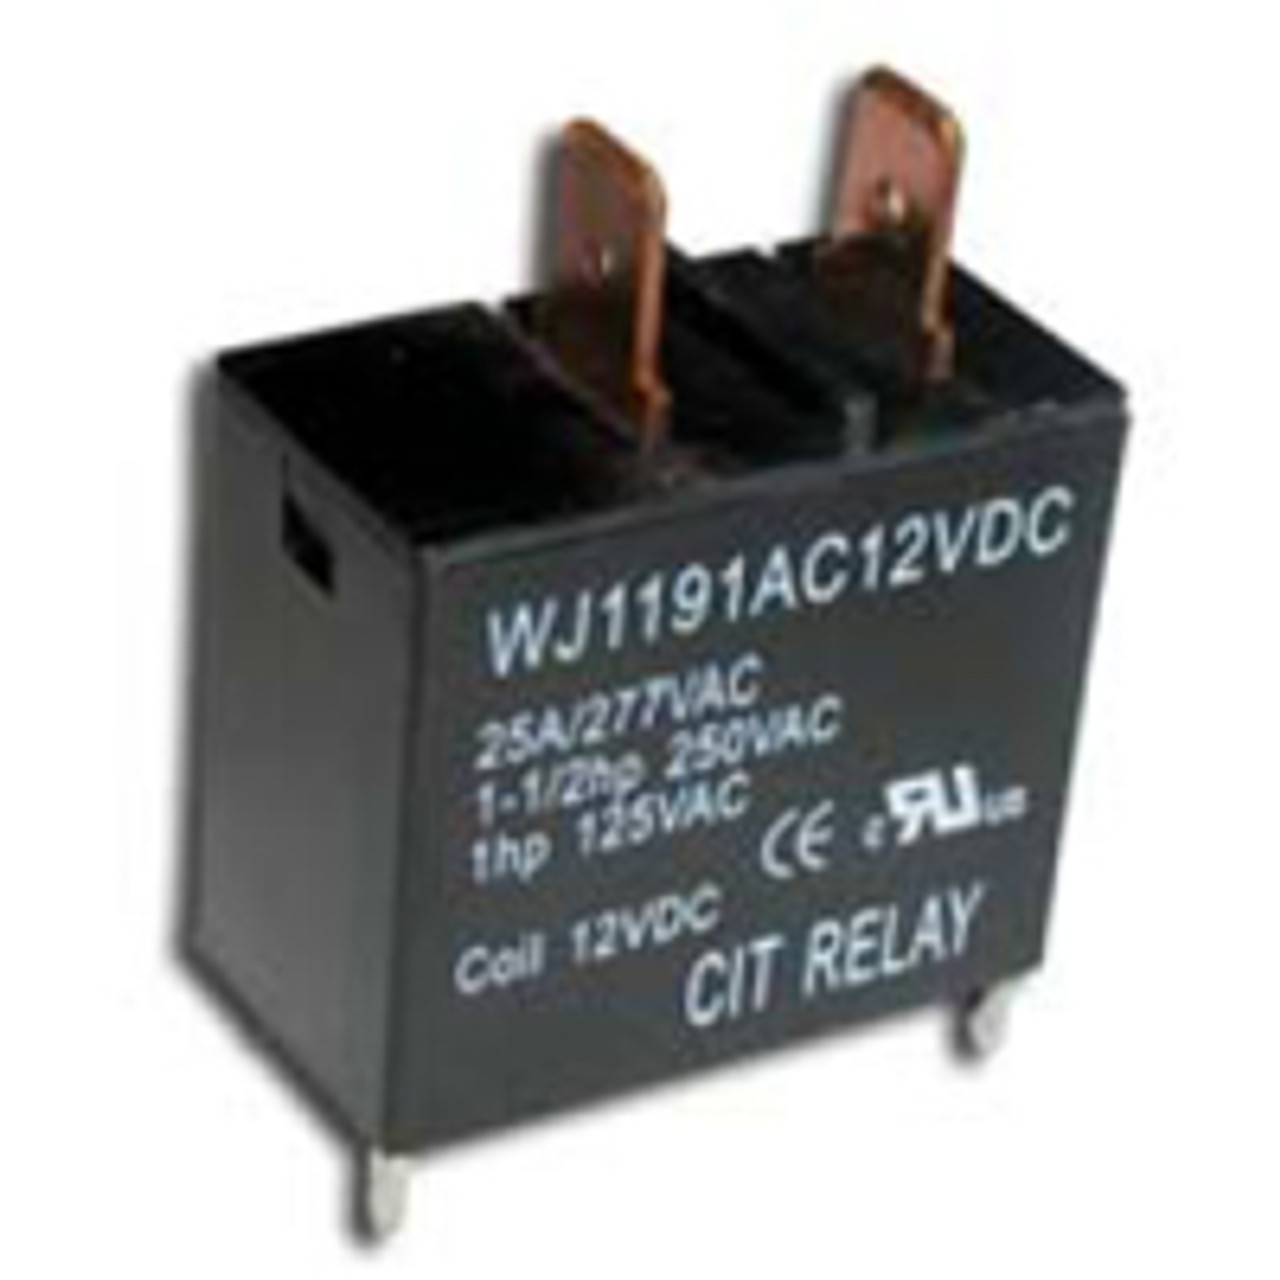 CIT Relay and Switch J1191AP5VDC Power Relays